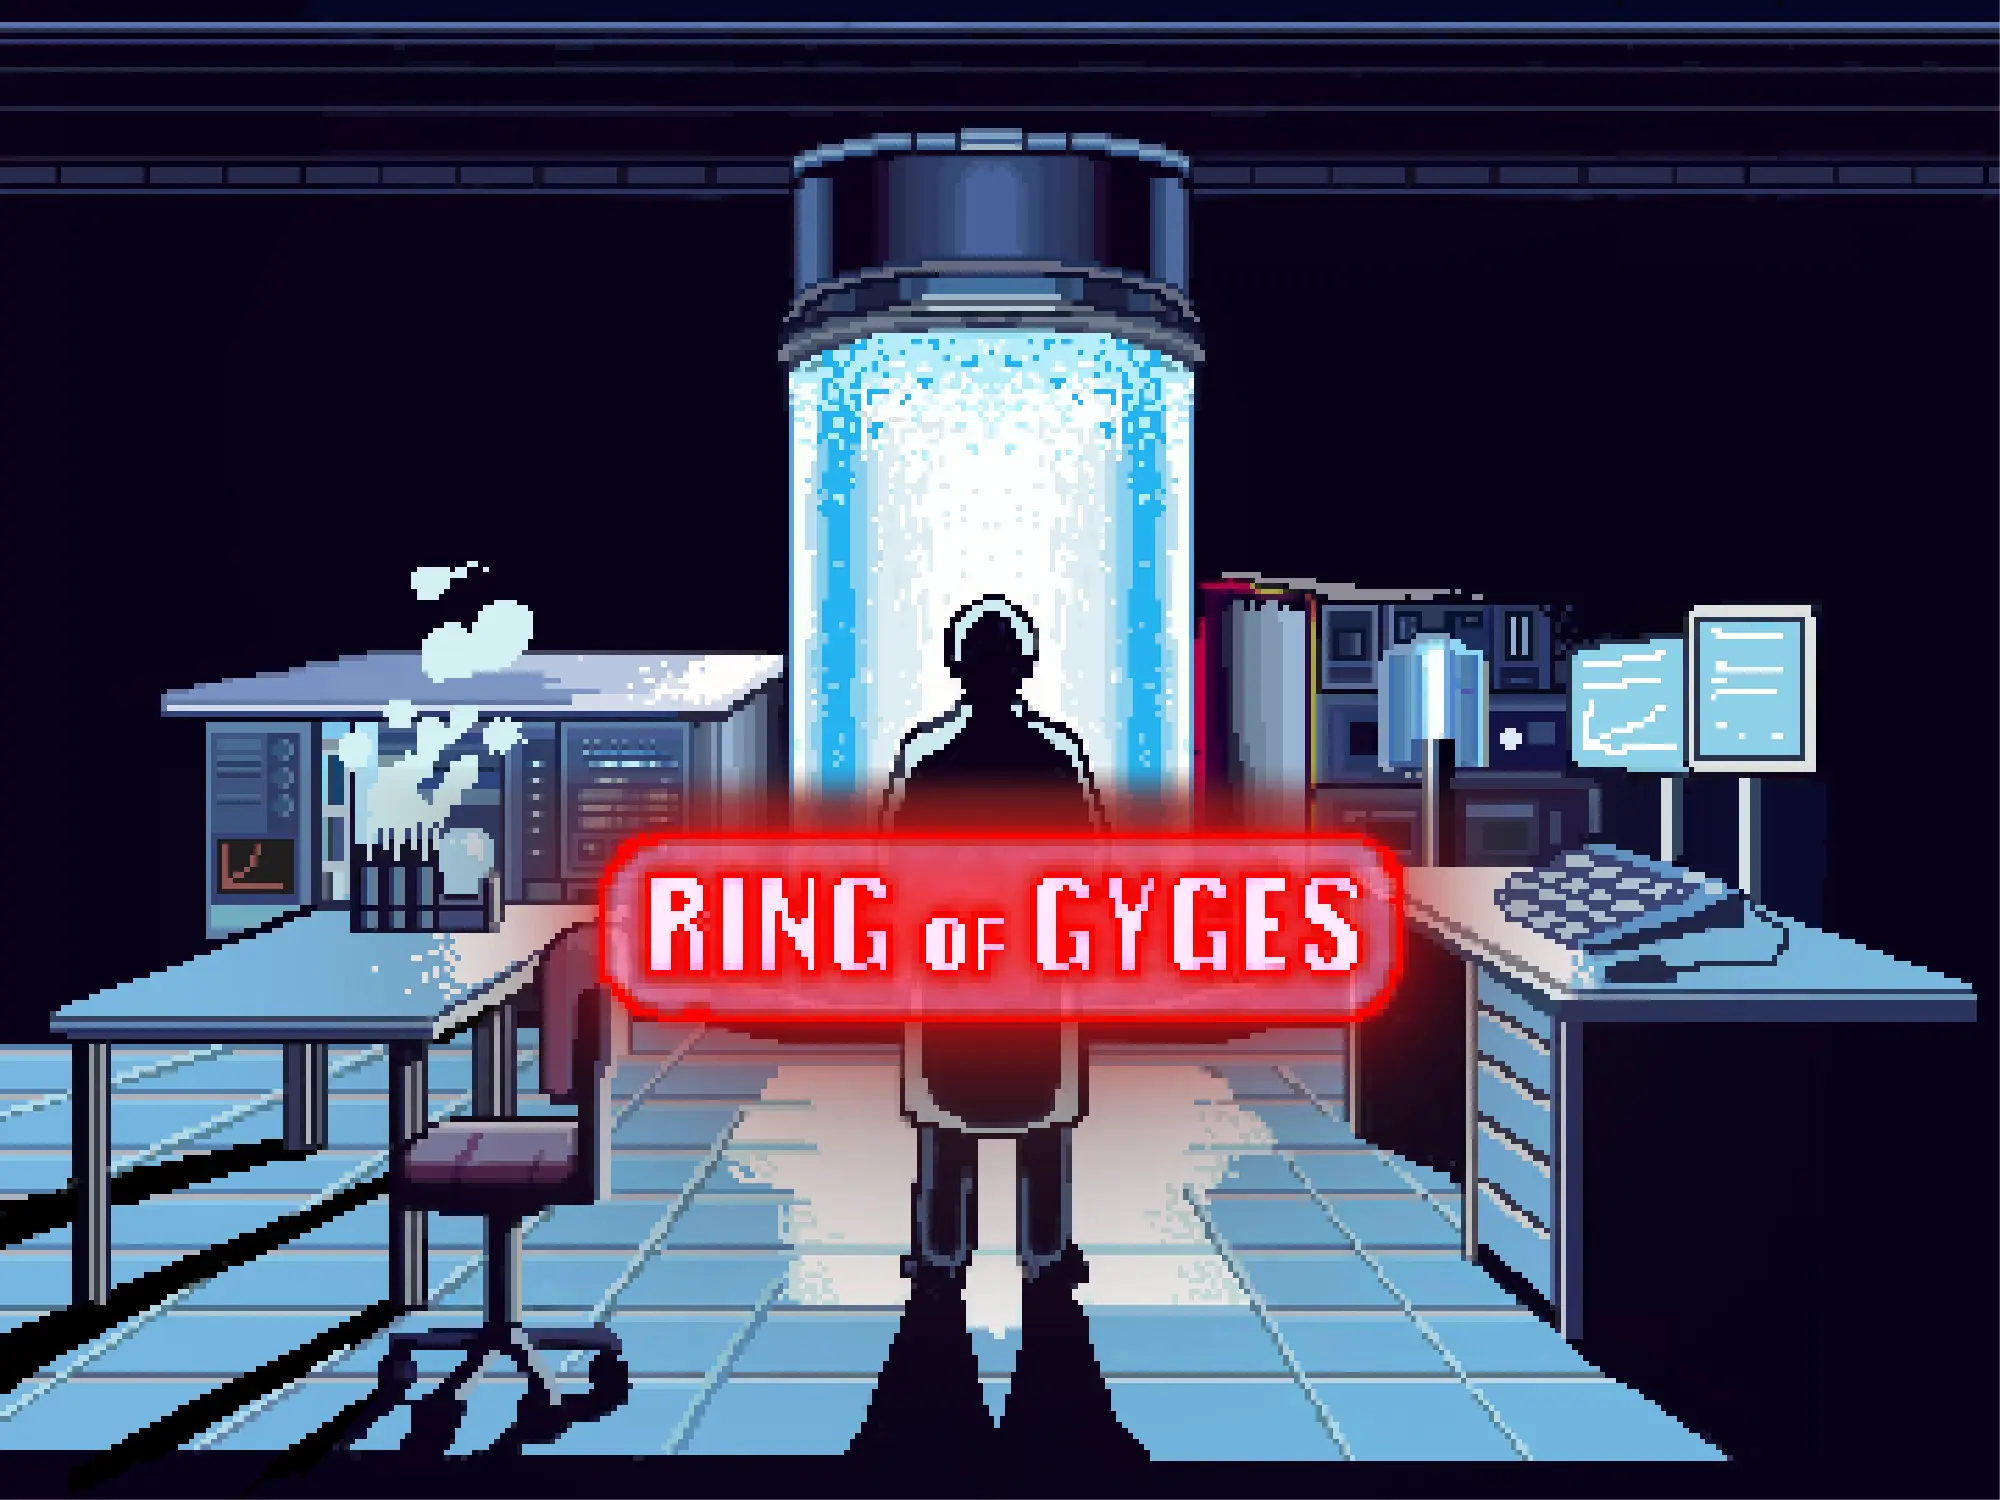 Ring of Gyges main image